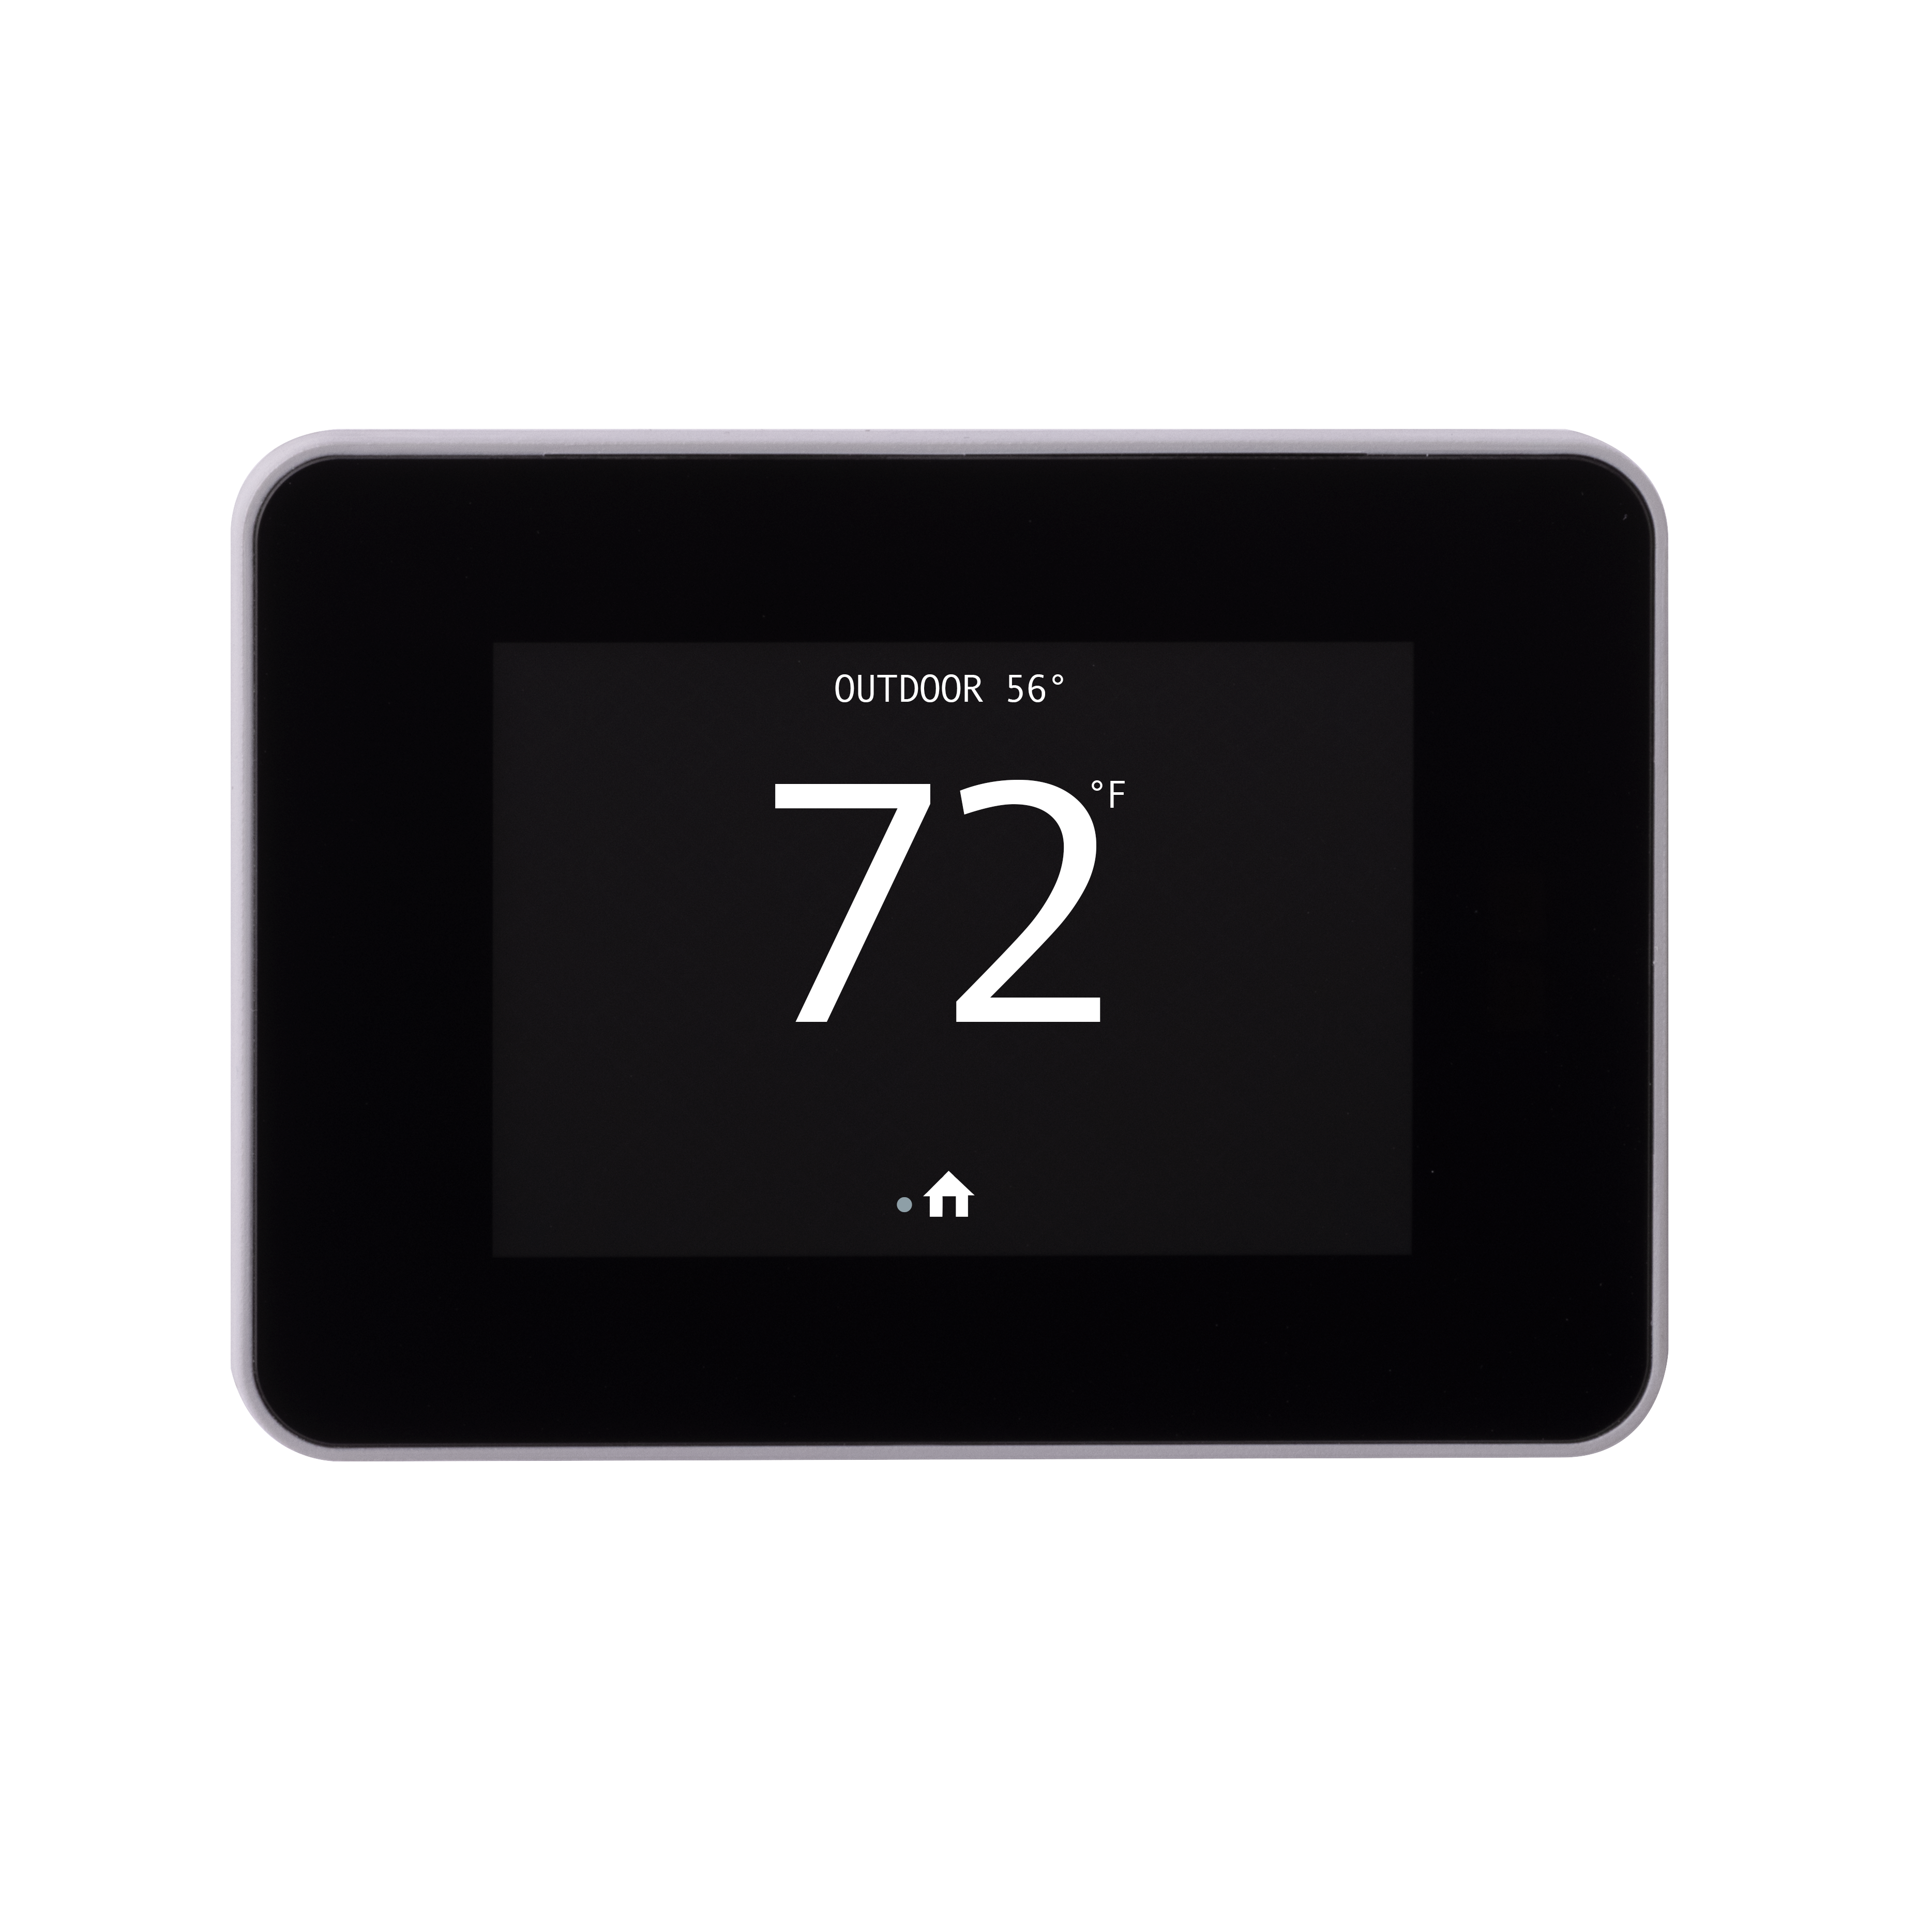 https://images.carriercms.com/image/upload/v1612456754/carrier/residential-hvac/products/thermostats/infinity-smart-sensor-SYSTXZNSMS01.png